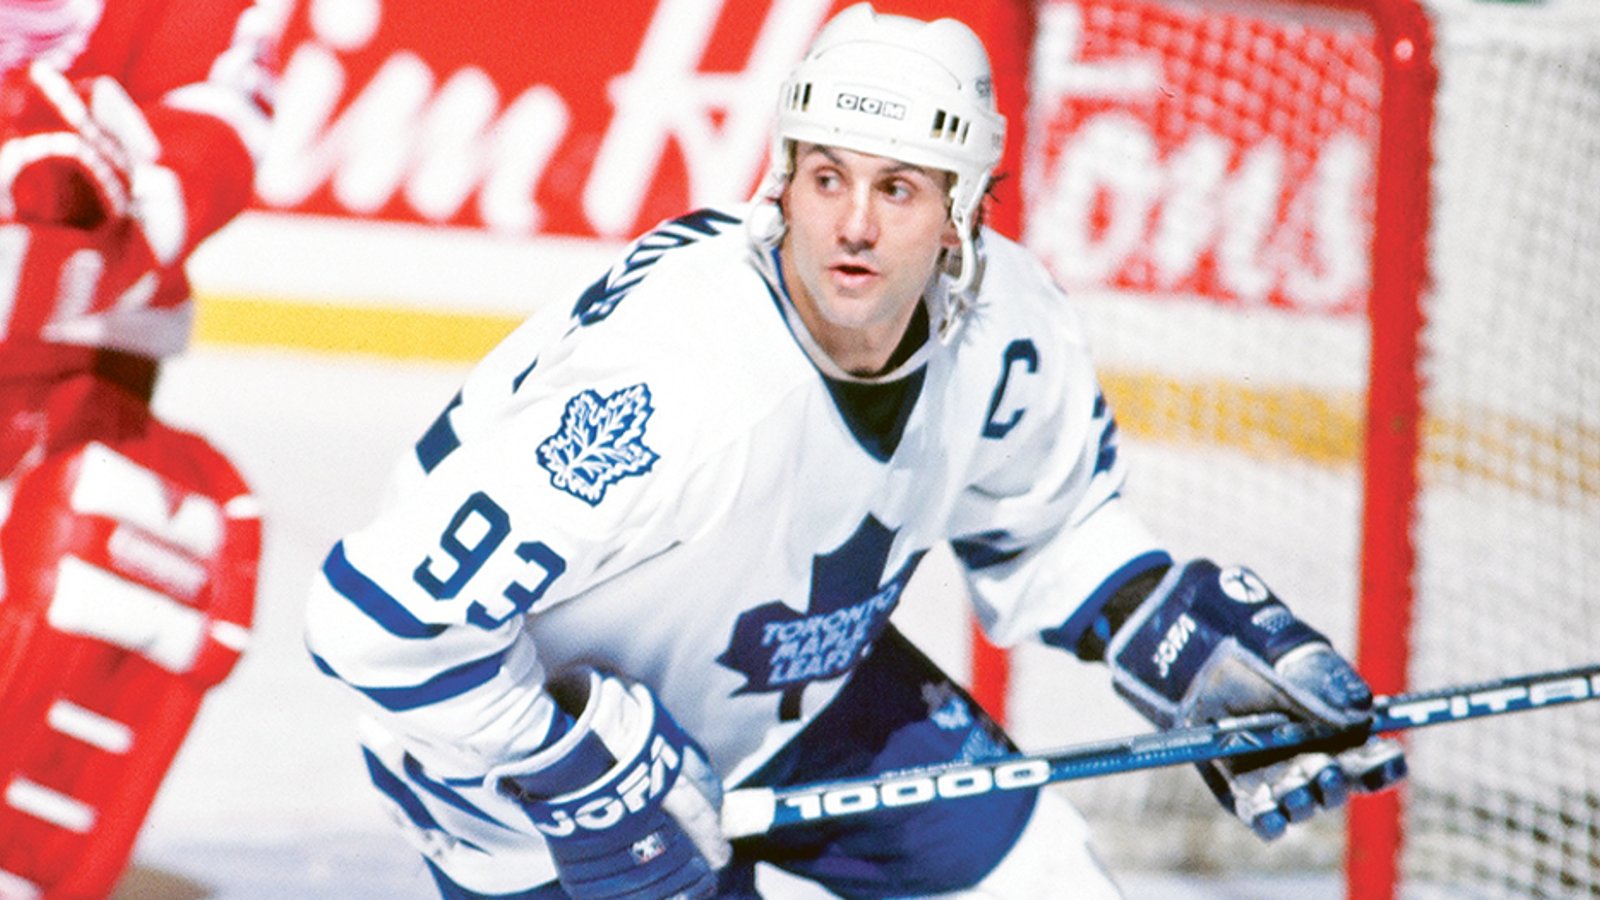 Leafs legend Doug Gilmour shows support for protests, then is immediately forced to backpedal